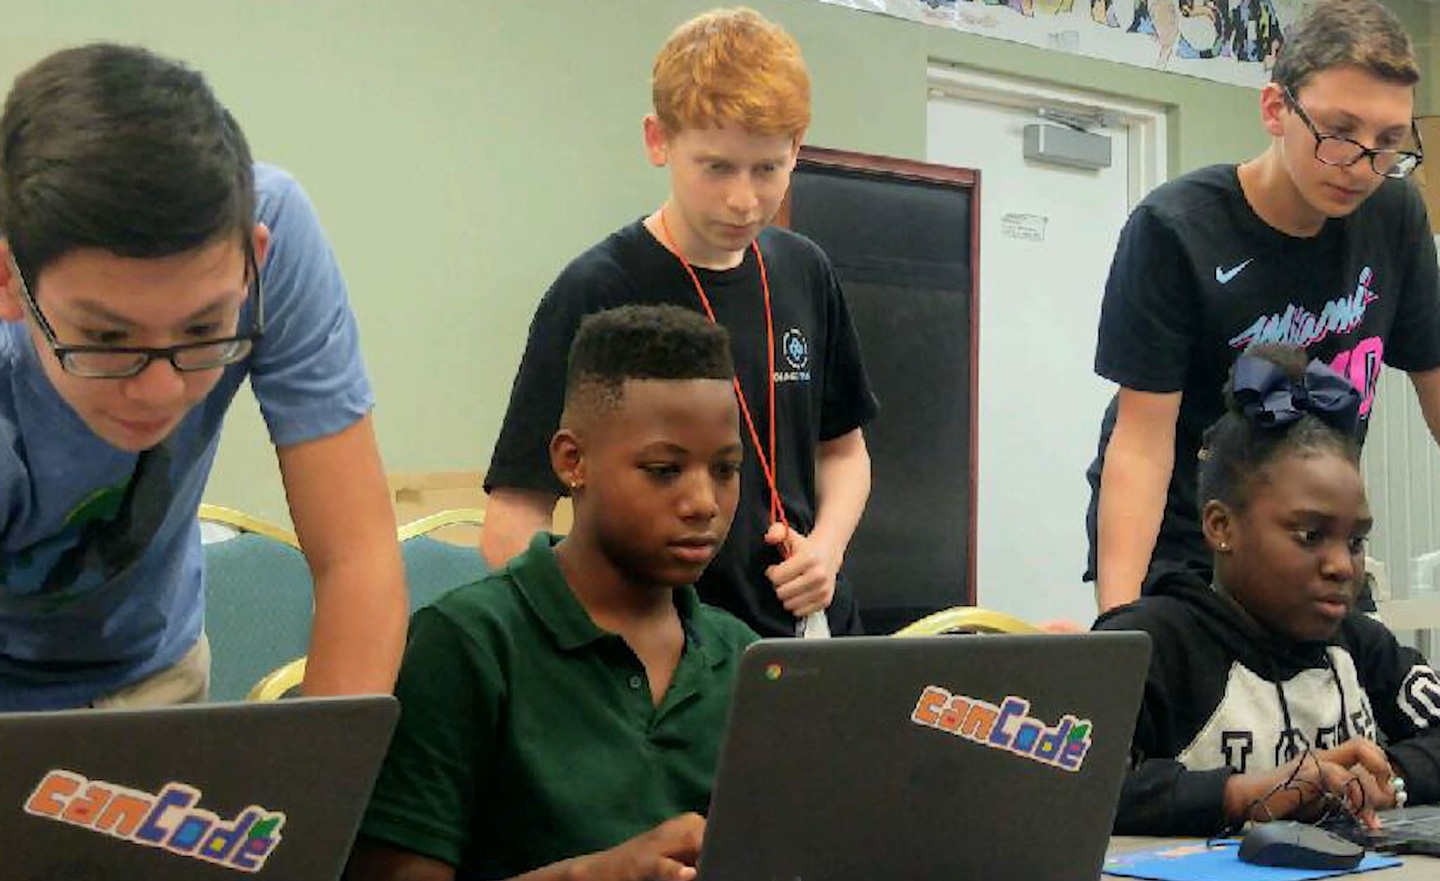 Noah and two other teens looking over the shoulders of young students at laptop computers.